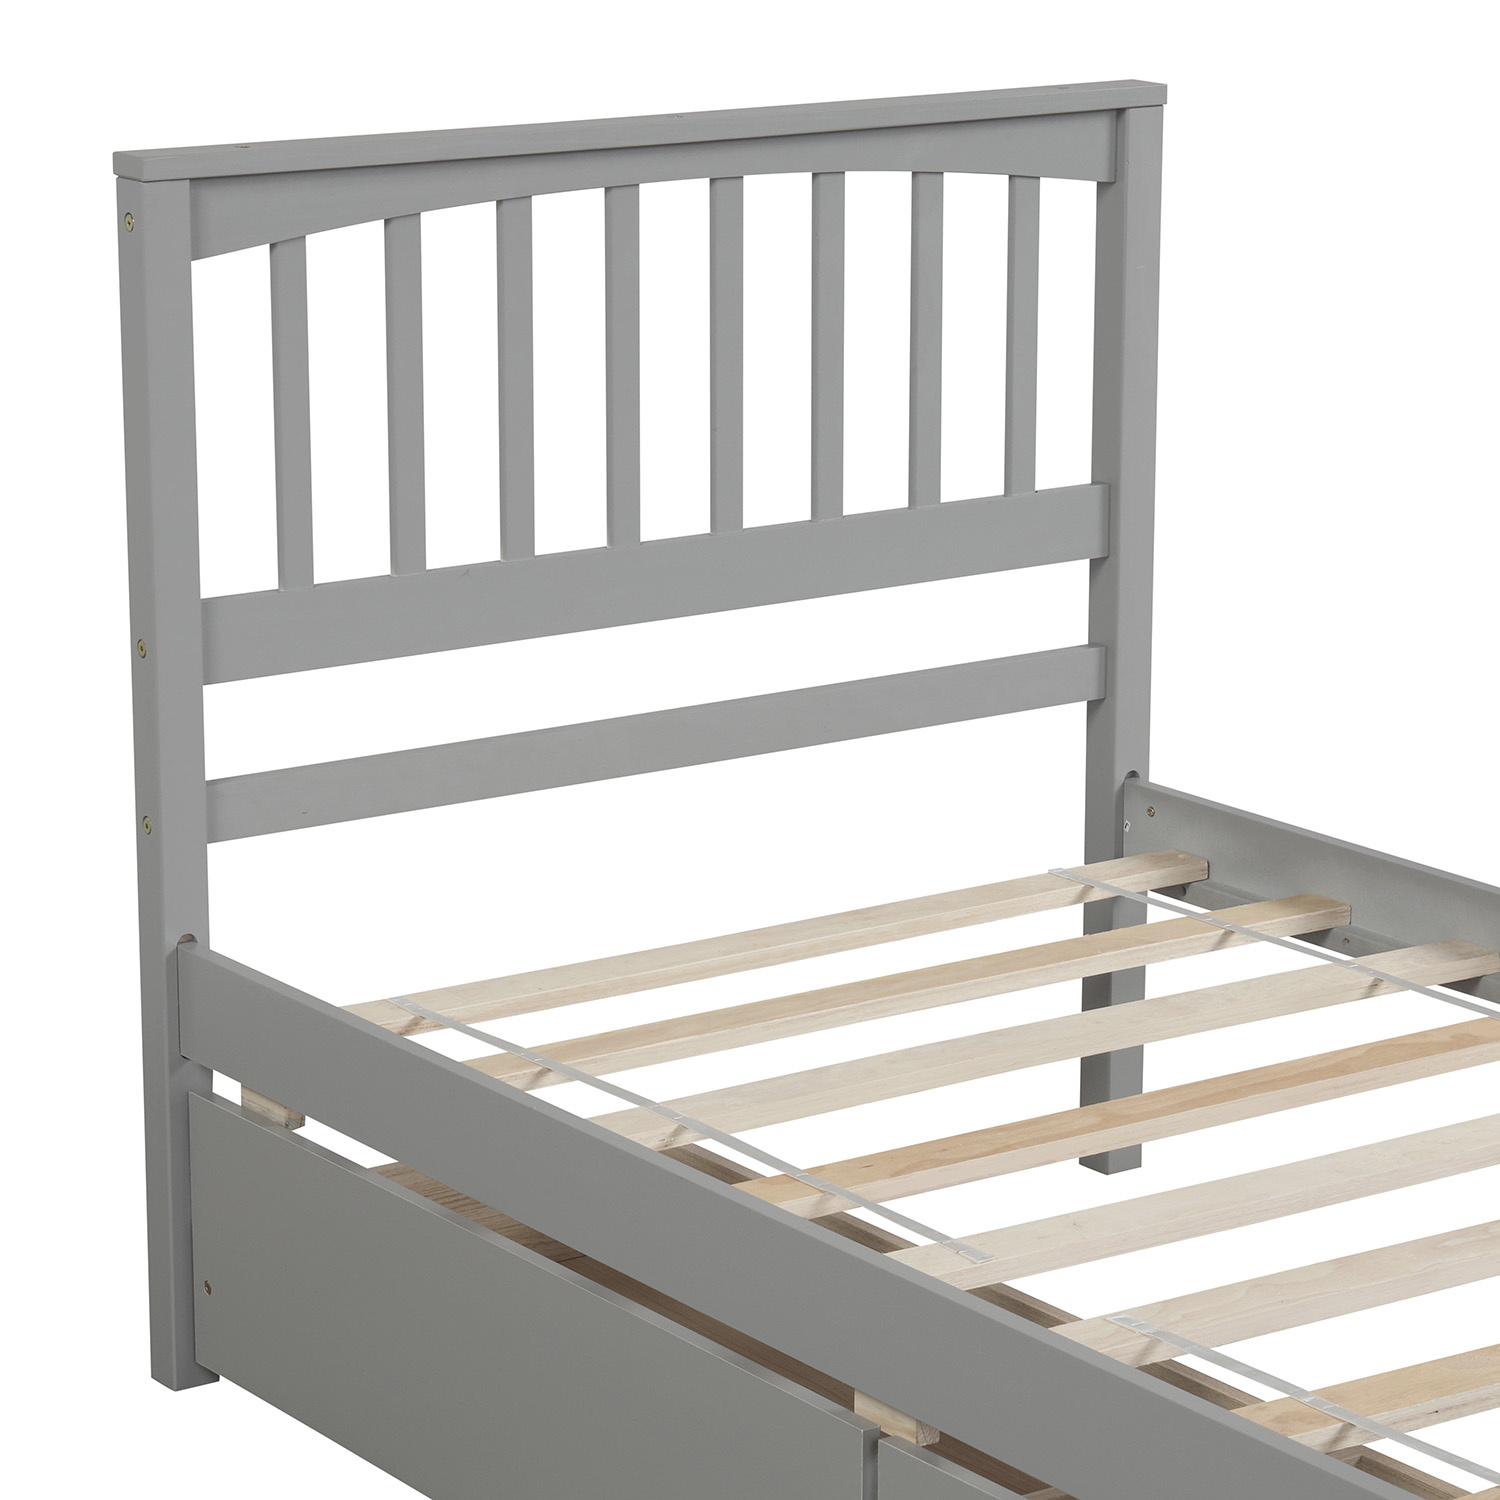 Twin Size Platform Bed with 2 Drawers, Classic Solid Wood Bed Frame with Headboard and Under-Bed Storage Space, for Kids Teens Adults Bedroom Furniture, No Box Spring Need, Grey - image 5 of 6